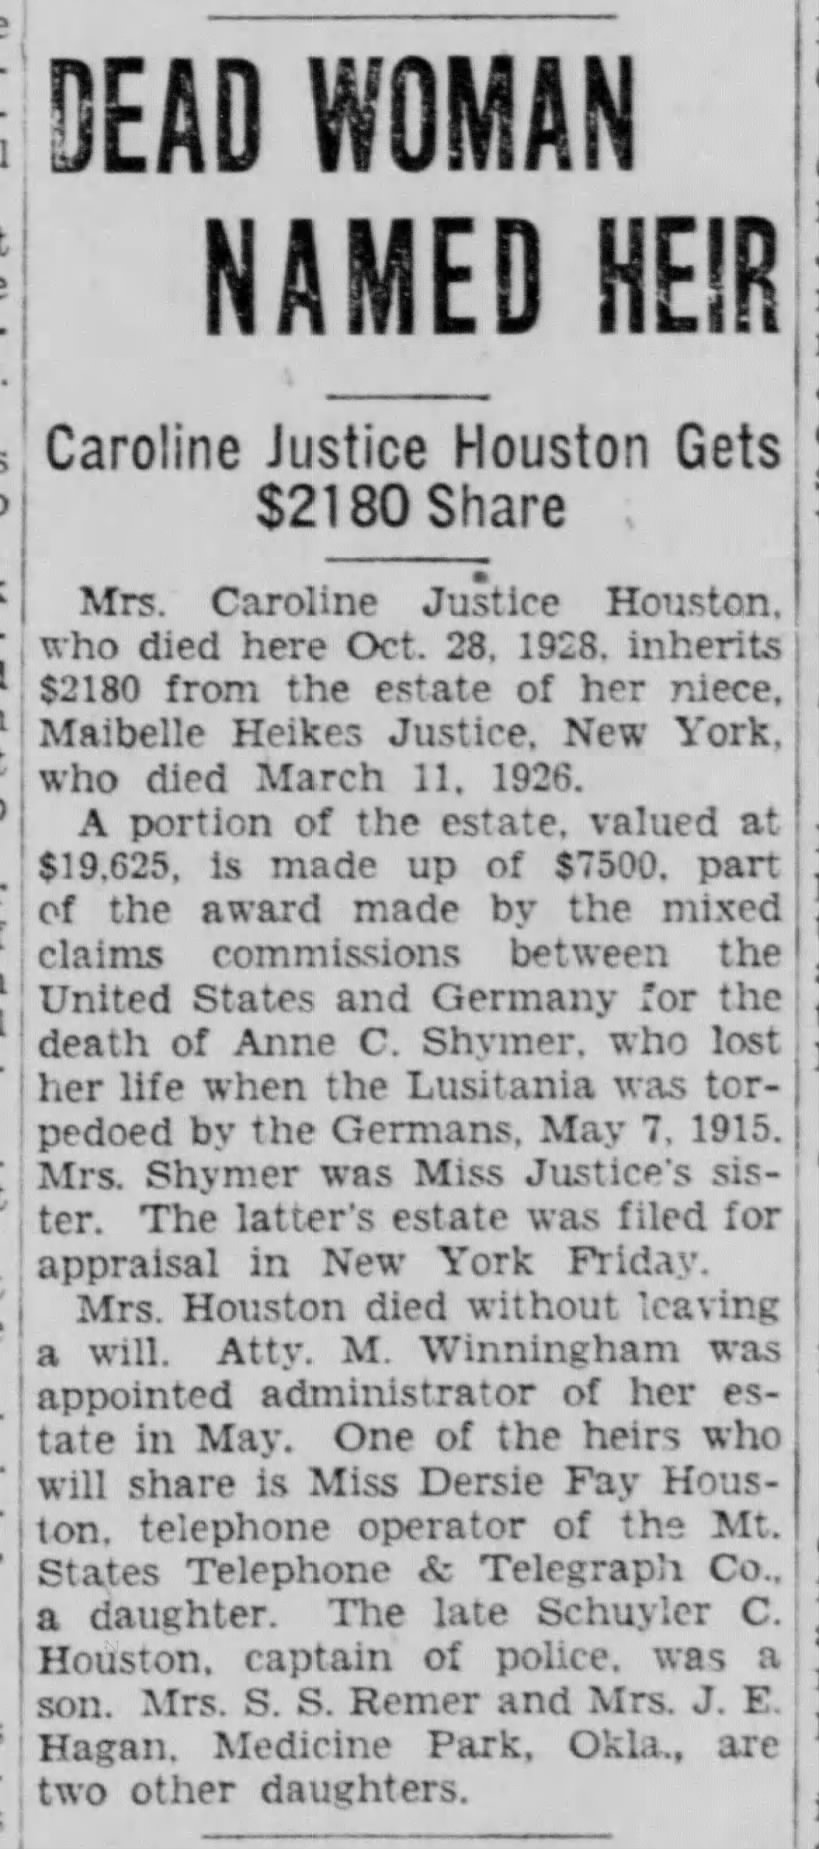 Death of Maibell Heikes Justice and her aunt, Caroline Justice Houston (1926, 1928).